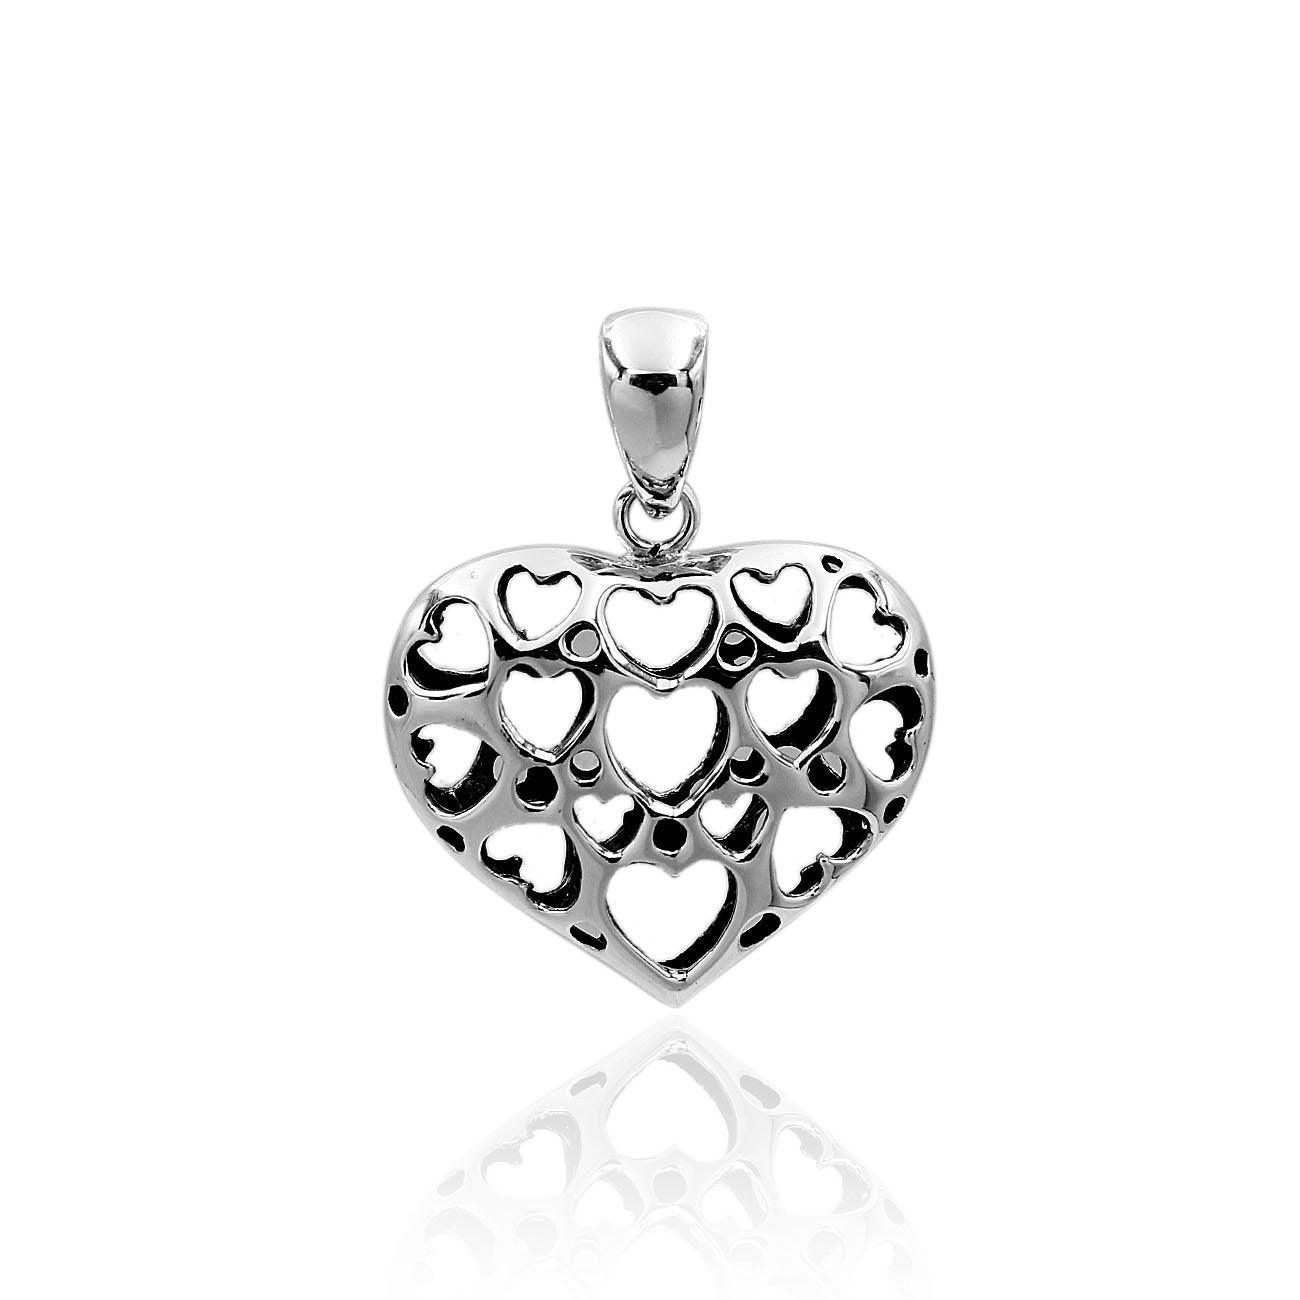 Handmade HEART Charm Pendant Necklace in 925 Sterling Silver With Chain - 3.0 Cm - Inspiring Jewellery